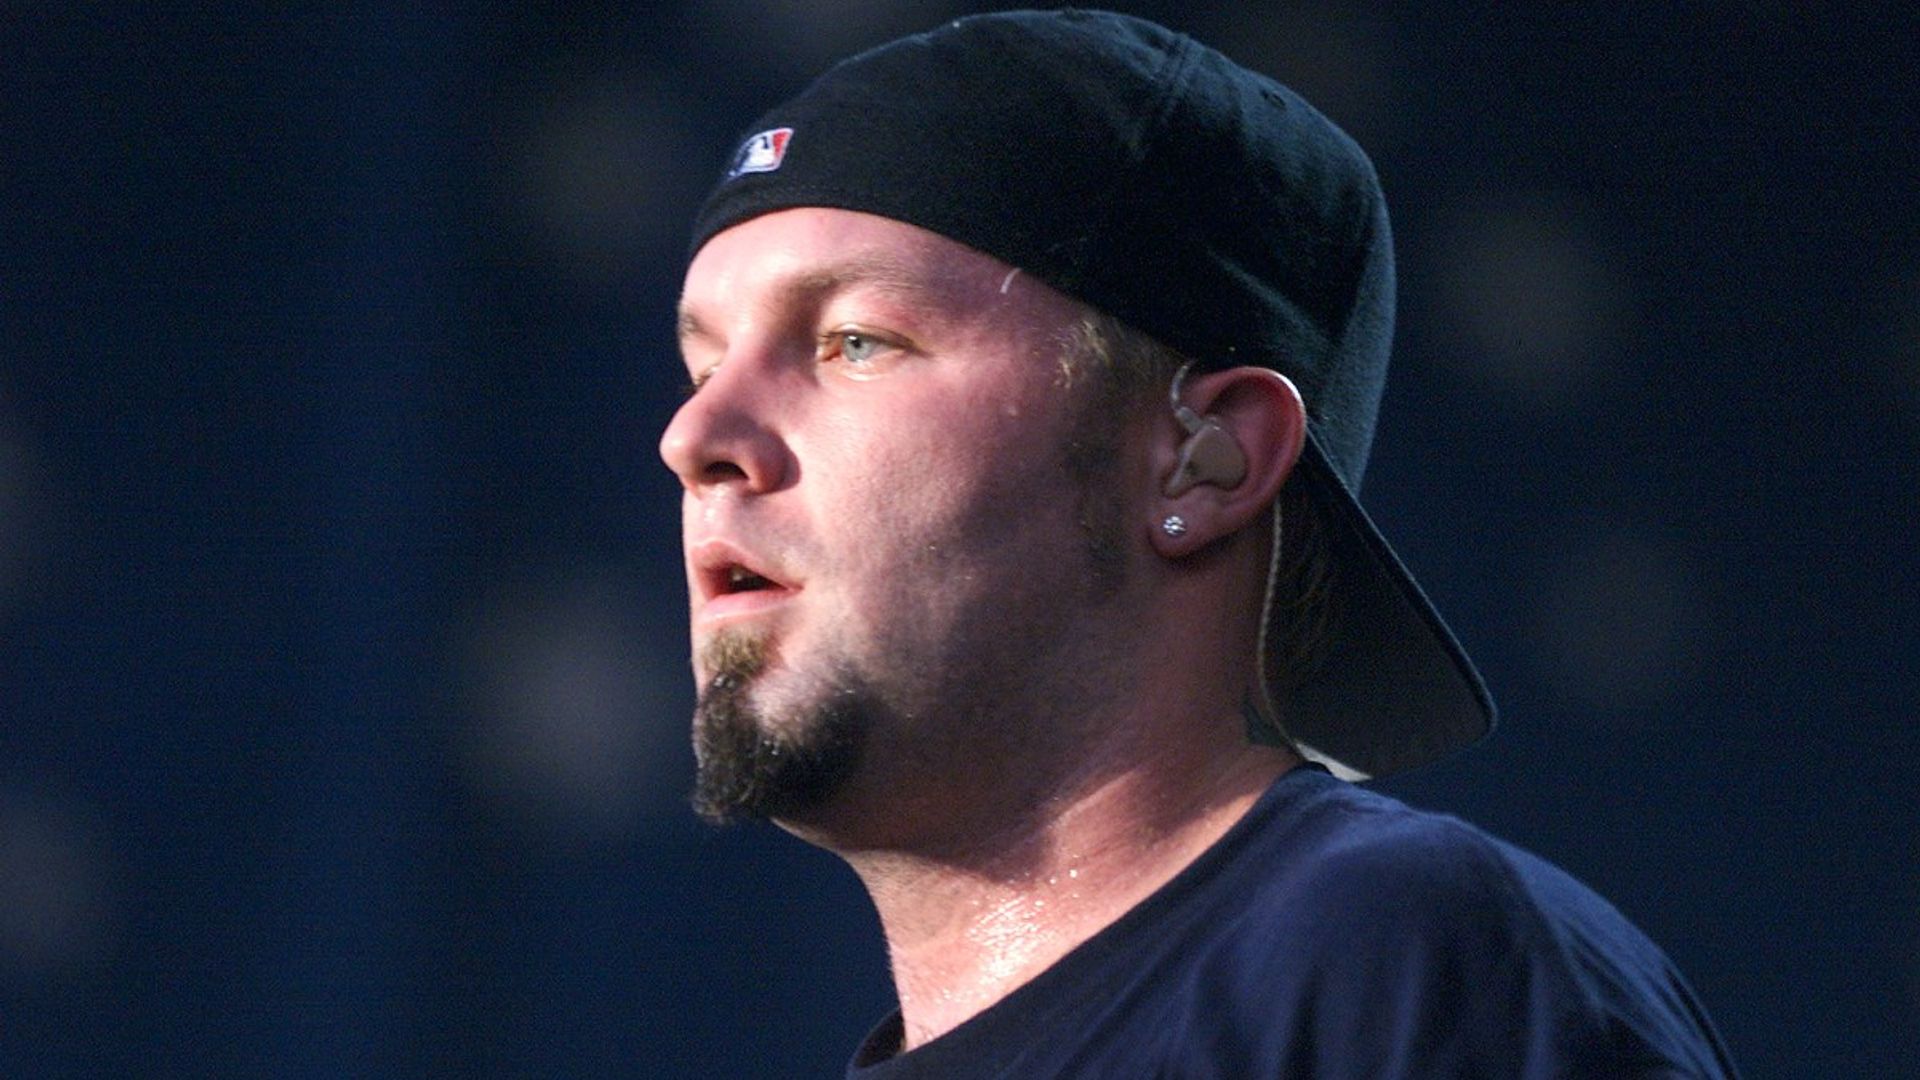 Woodstock ’99 what Limp Bizkit has said about show as viewers outraged